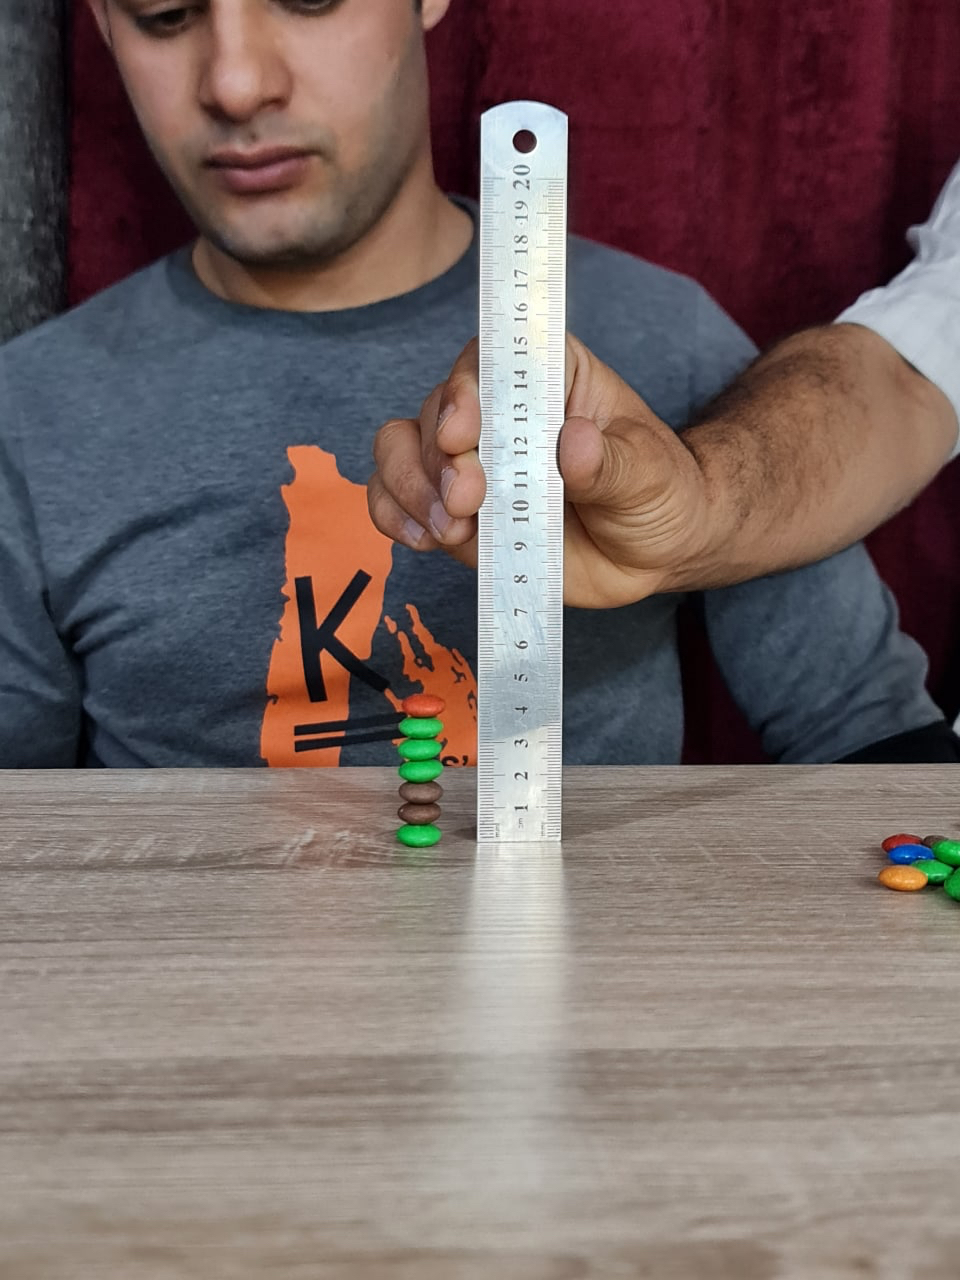 The world’s tallest stack of M&M's just got higher